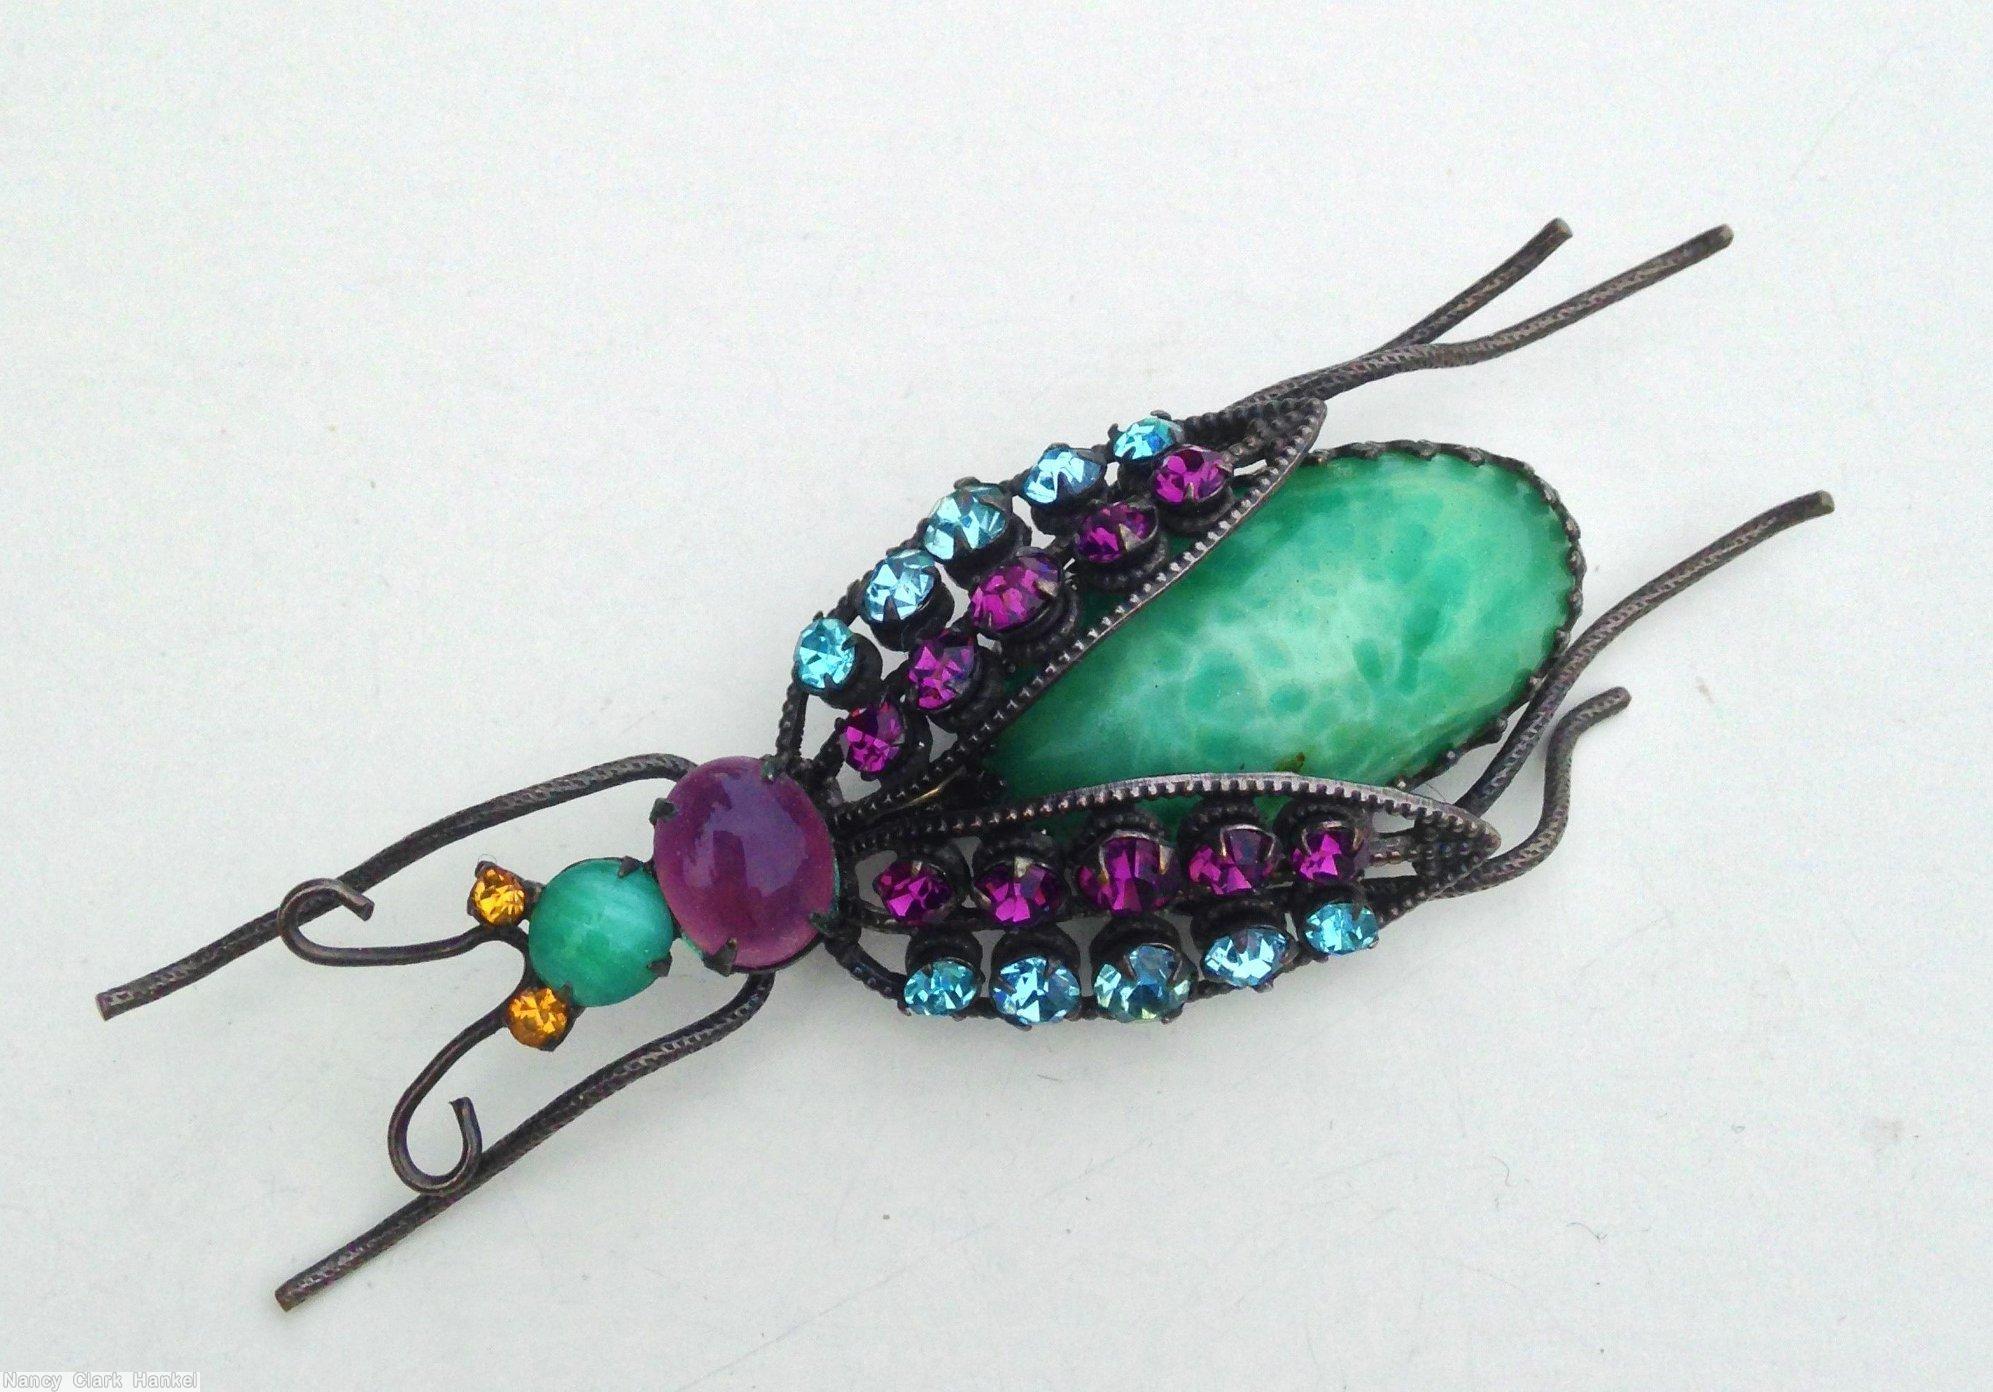 Schreiner 2 whisker long oval cab body bug 2 antenna 2 wired seeds wing marbled green large oval cab purple ice blue jewelry